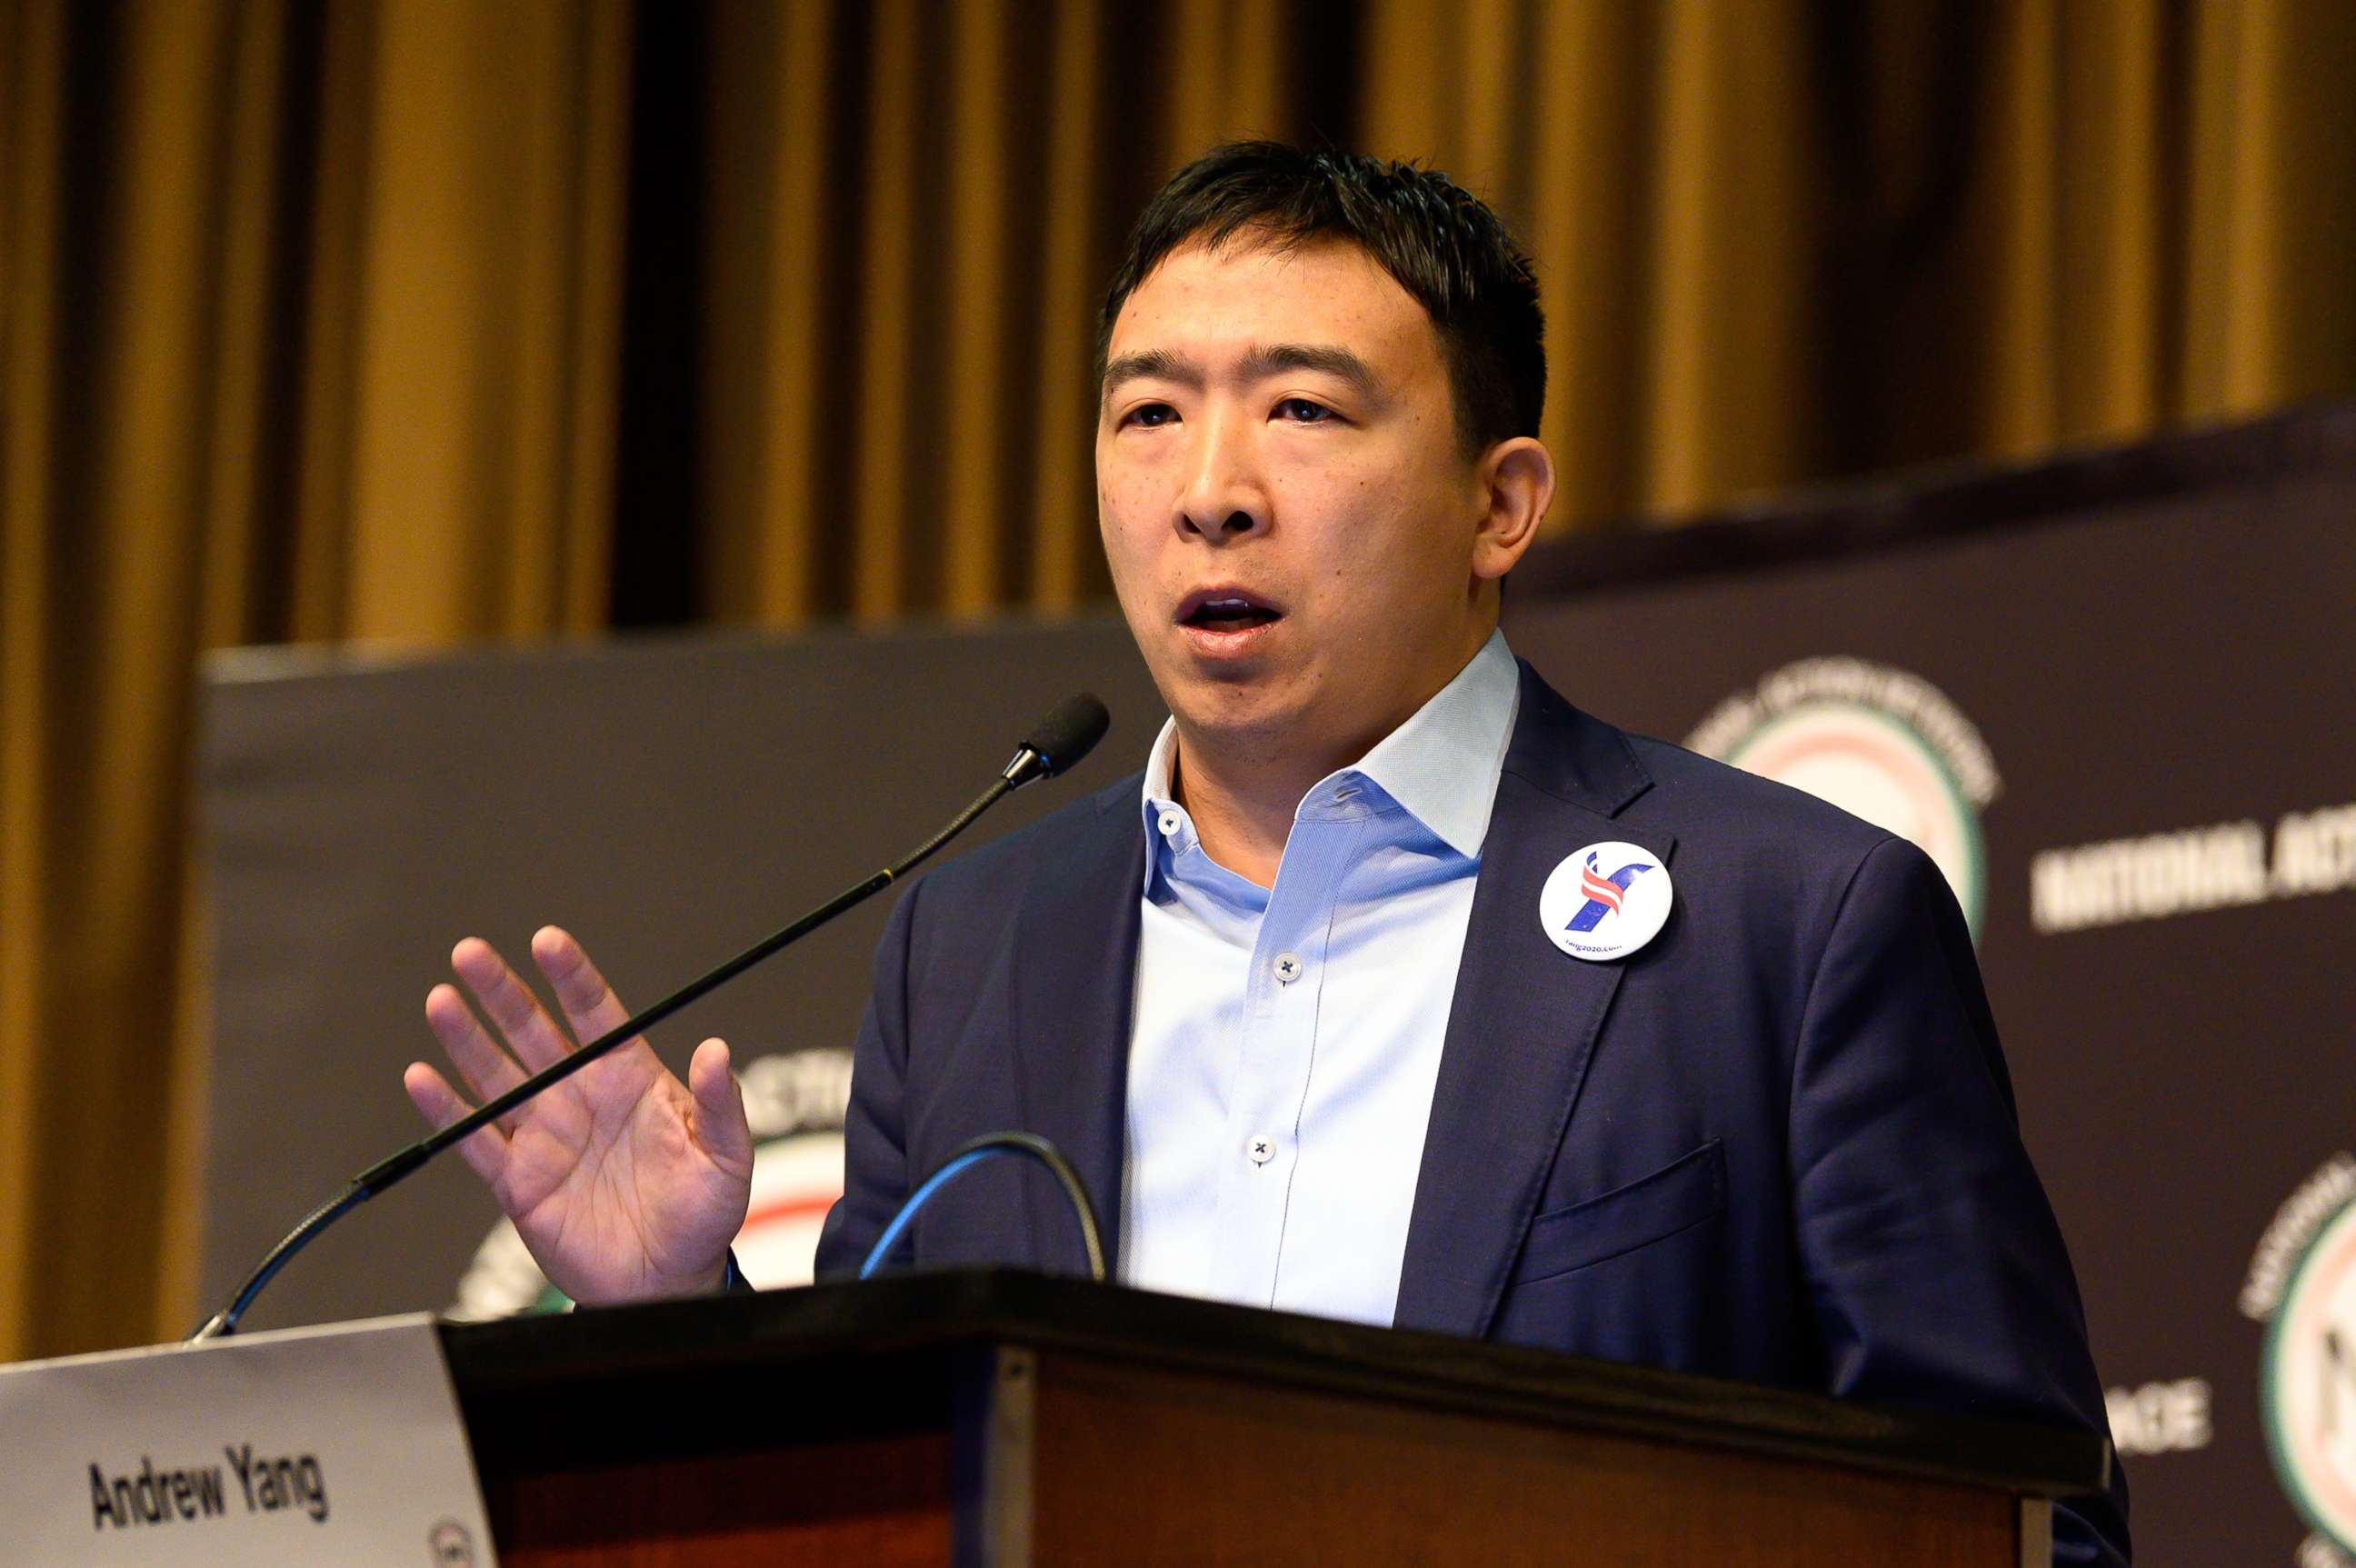 PHOTO: Andrew Yang speaks at the National Action Network (NAN) convention in New York City, April 4, 2019.